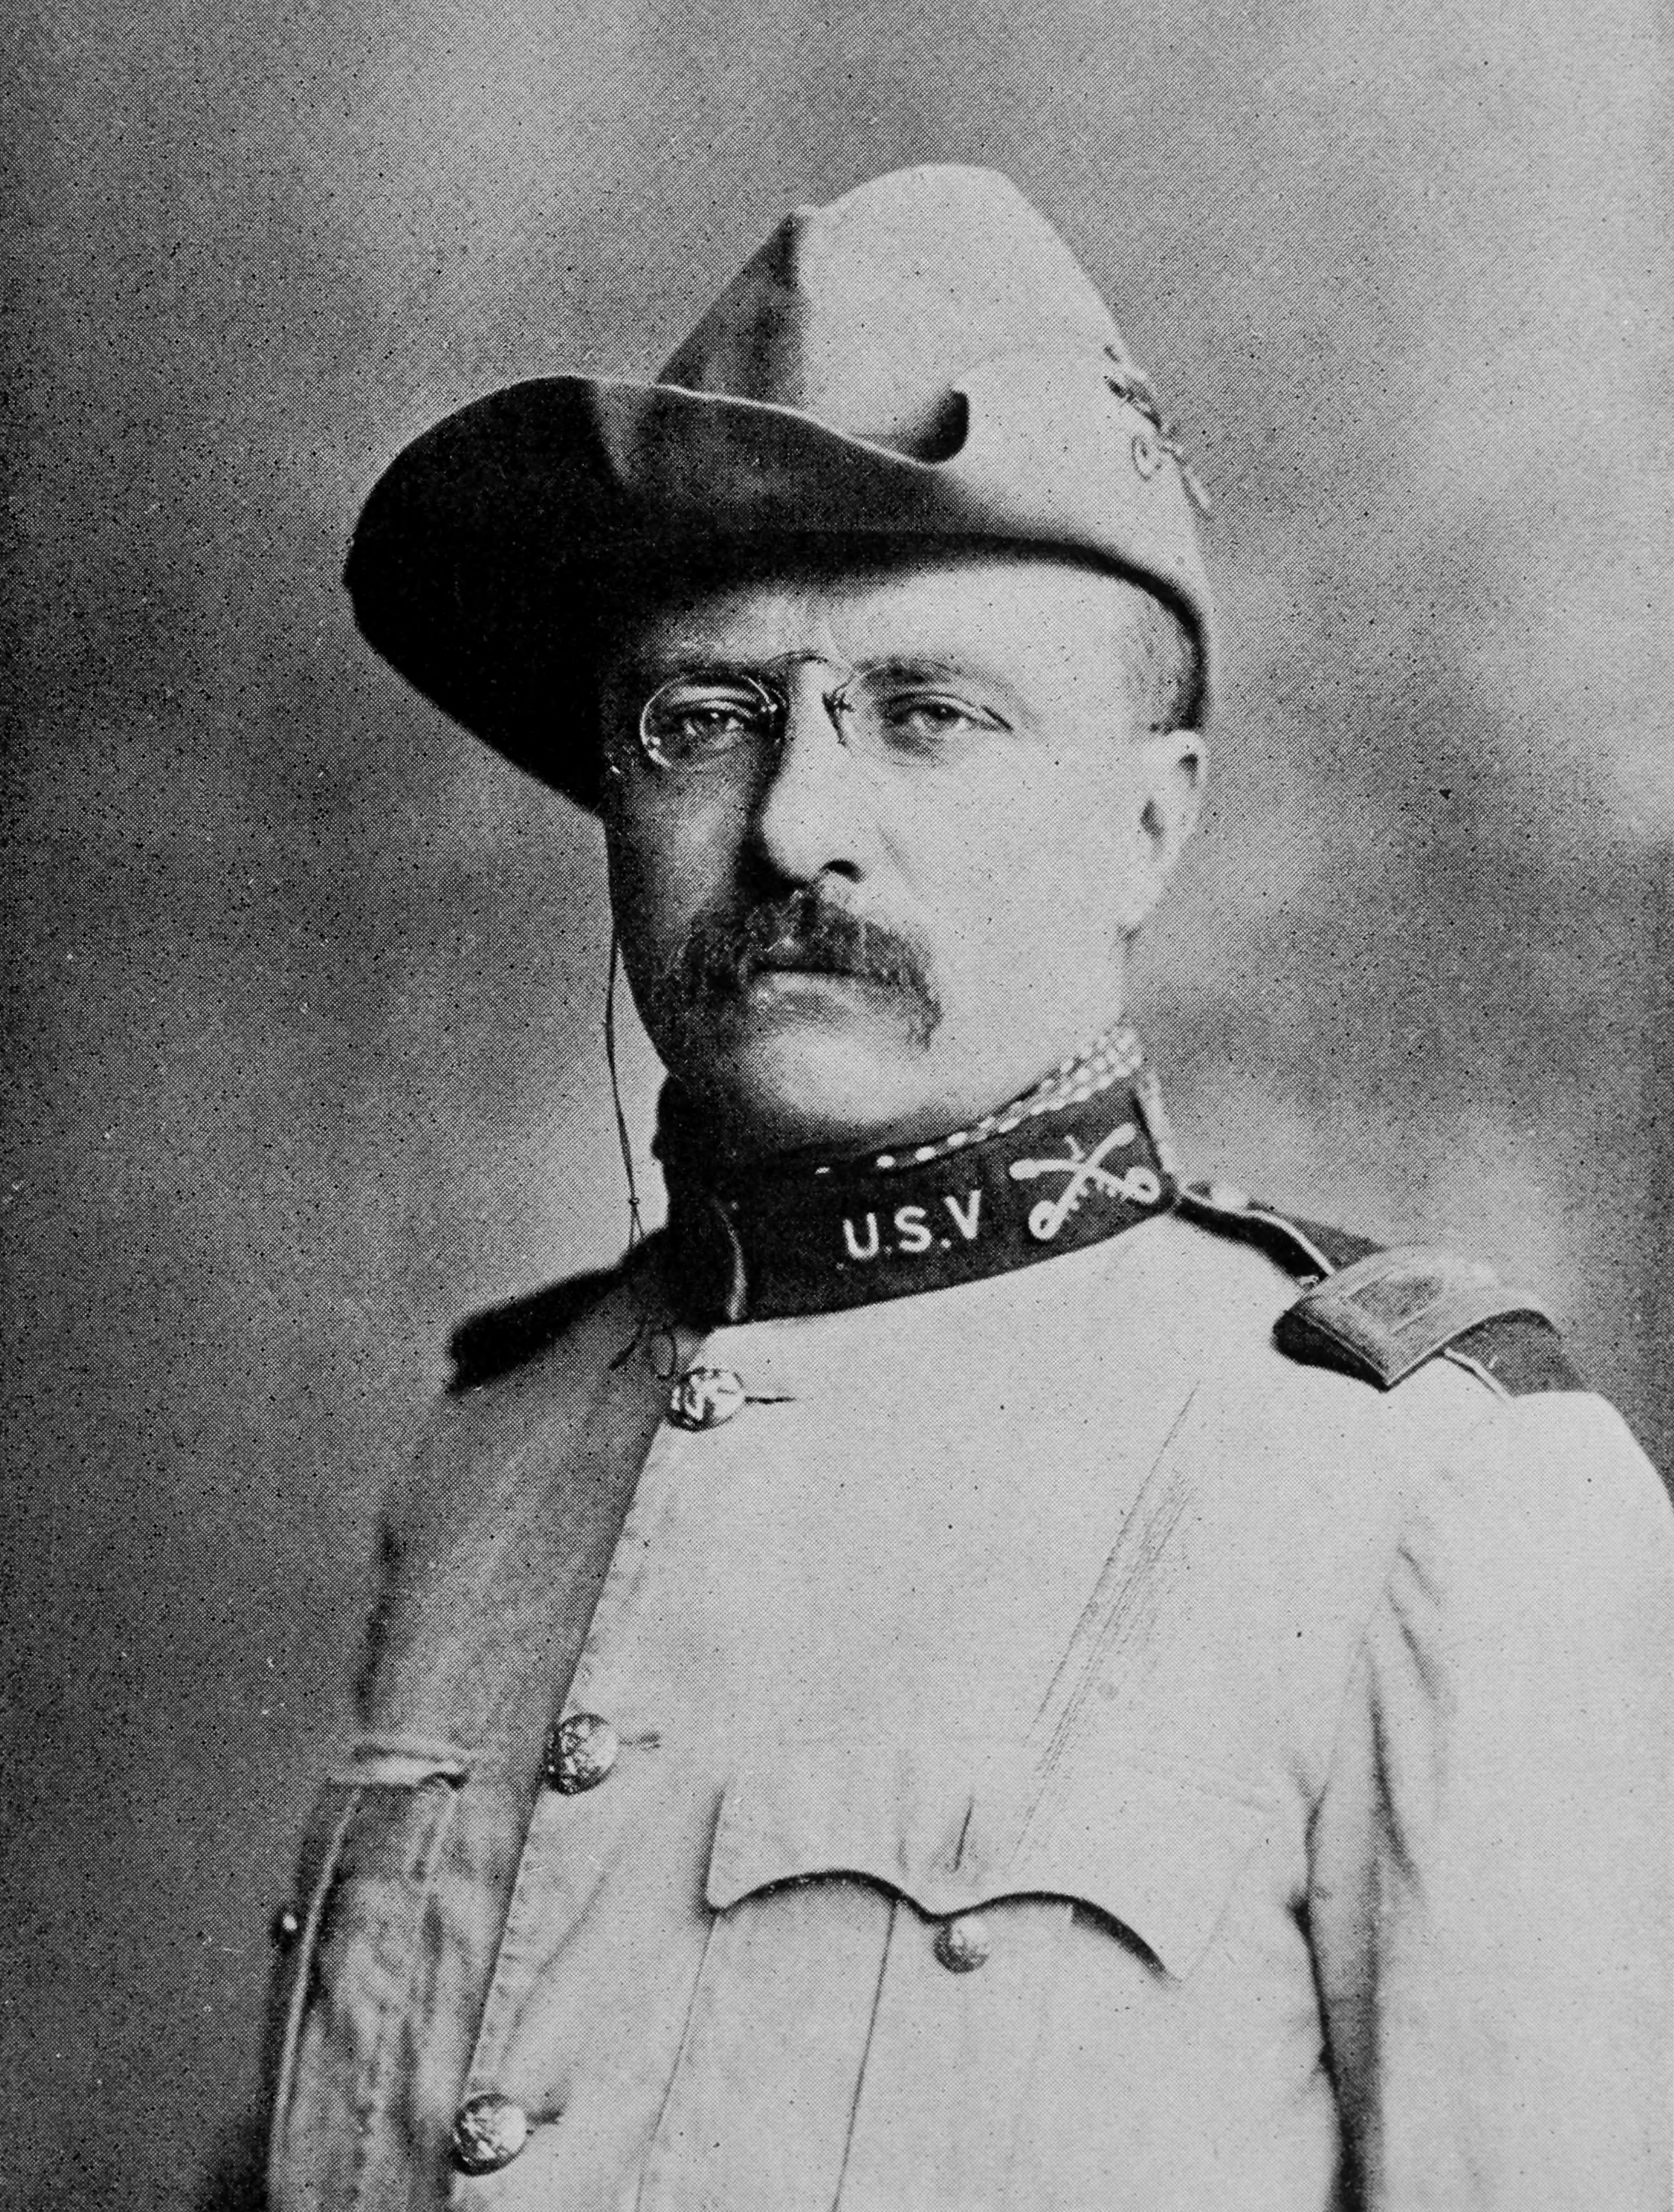 http://upload.wikimedia.org/wikipedia/commons/7/79/Col._Theodore_Roosevelt.png